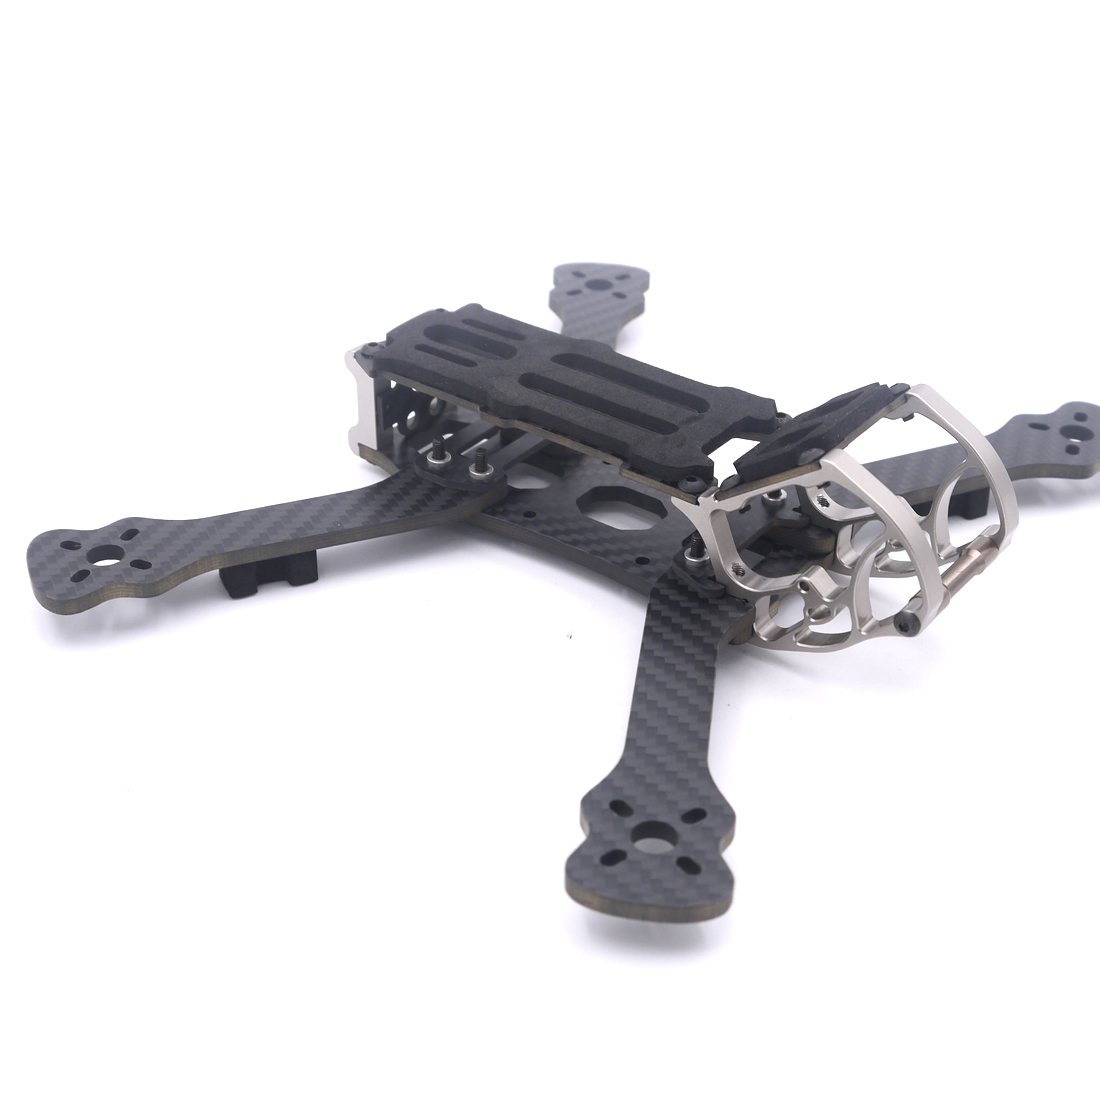 LEACO Umbrella 5 Inch 230mm FPV Racing Frame Kit 4mm Arm Carbon Fiber For RC Drone - Photo: 5